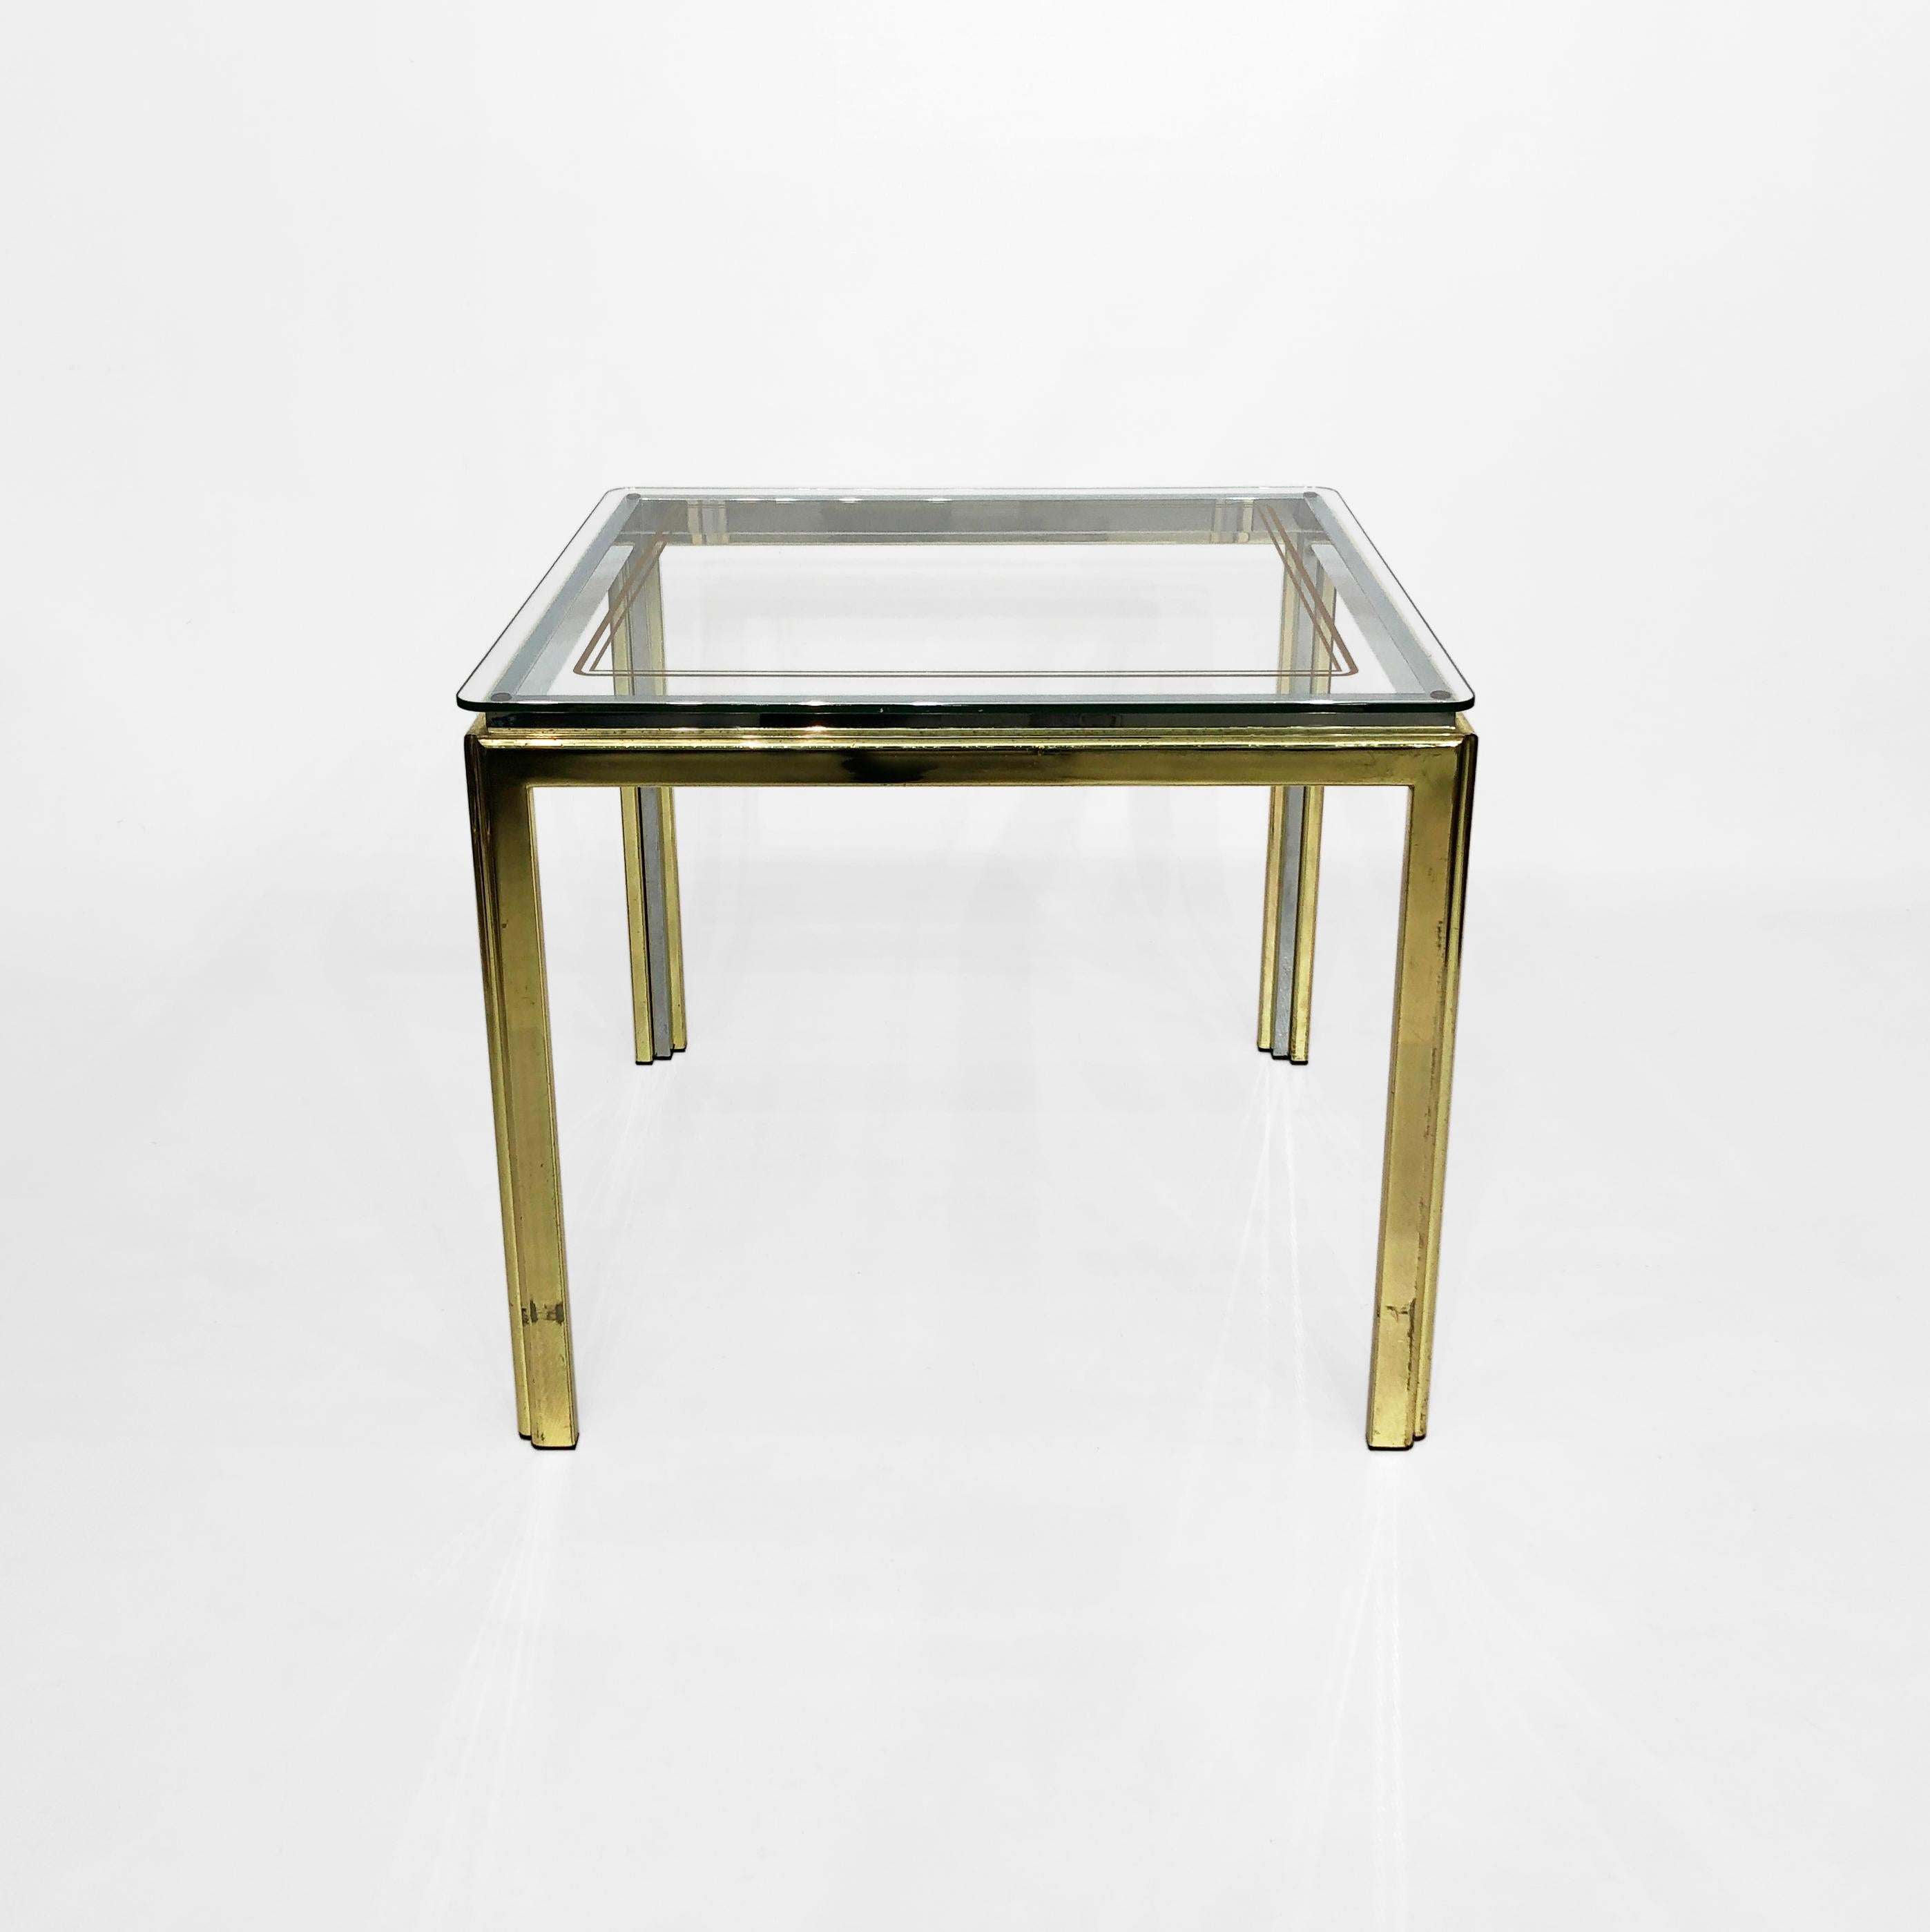 A vintage side table with brass plating external frame and an inner elevated chrome frame that supports the glass top, a stylish and practical piece of furniture. The combination of brass and chrome creates a striking contrast that can add a touch